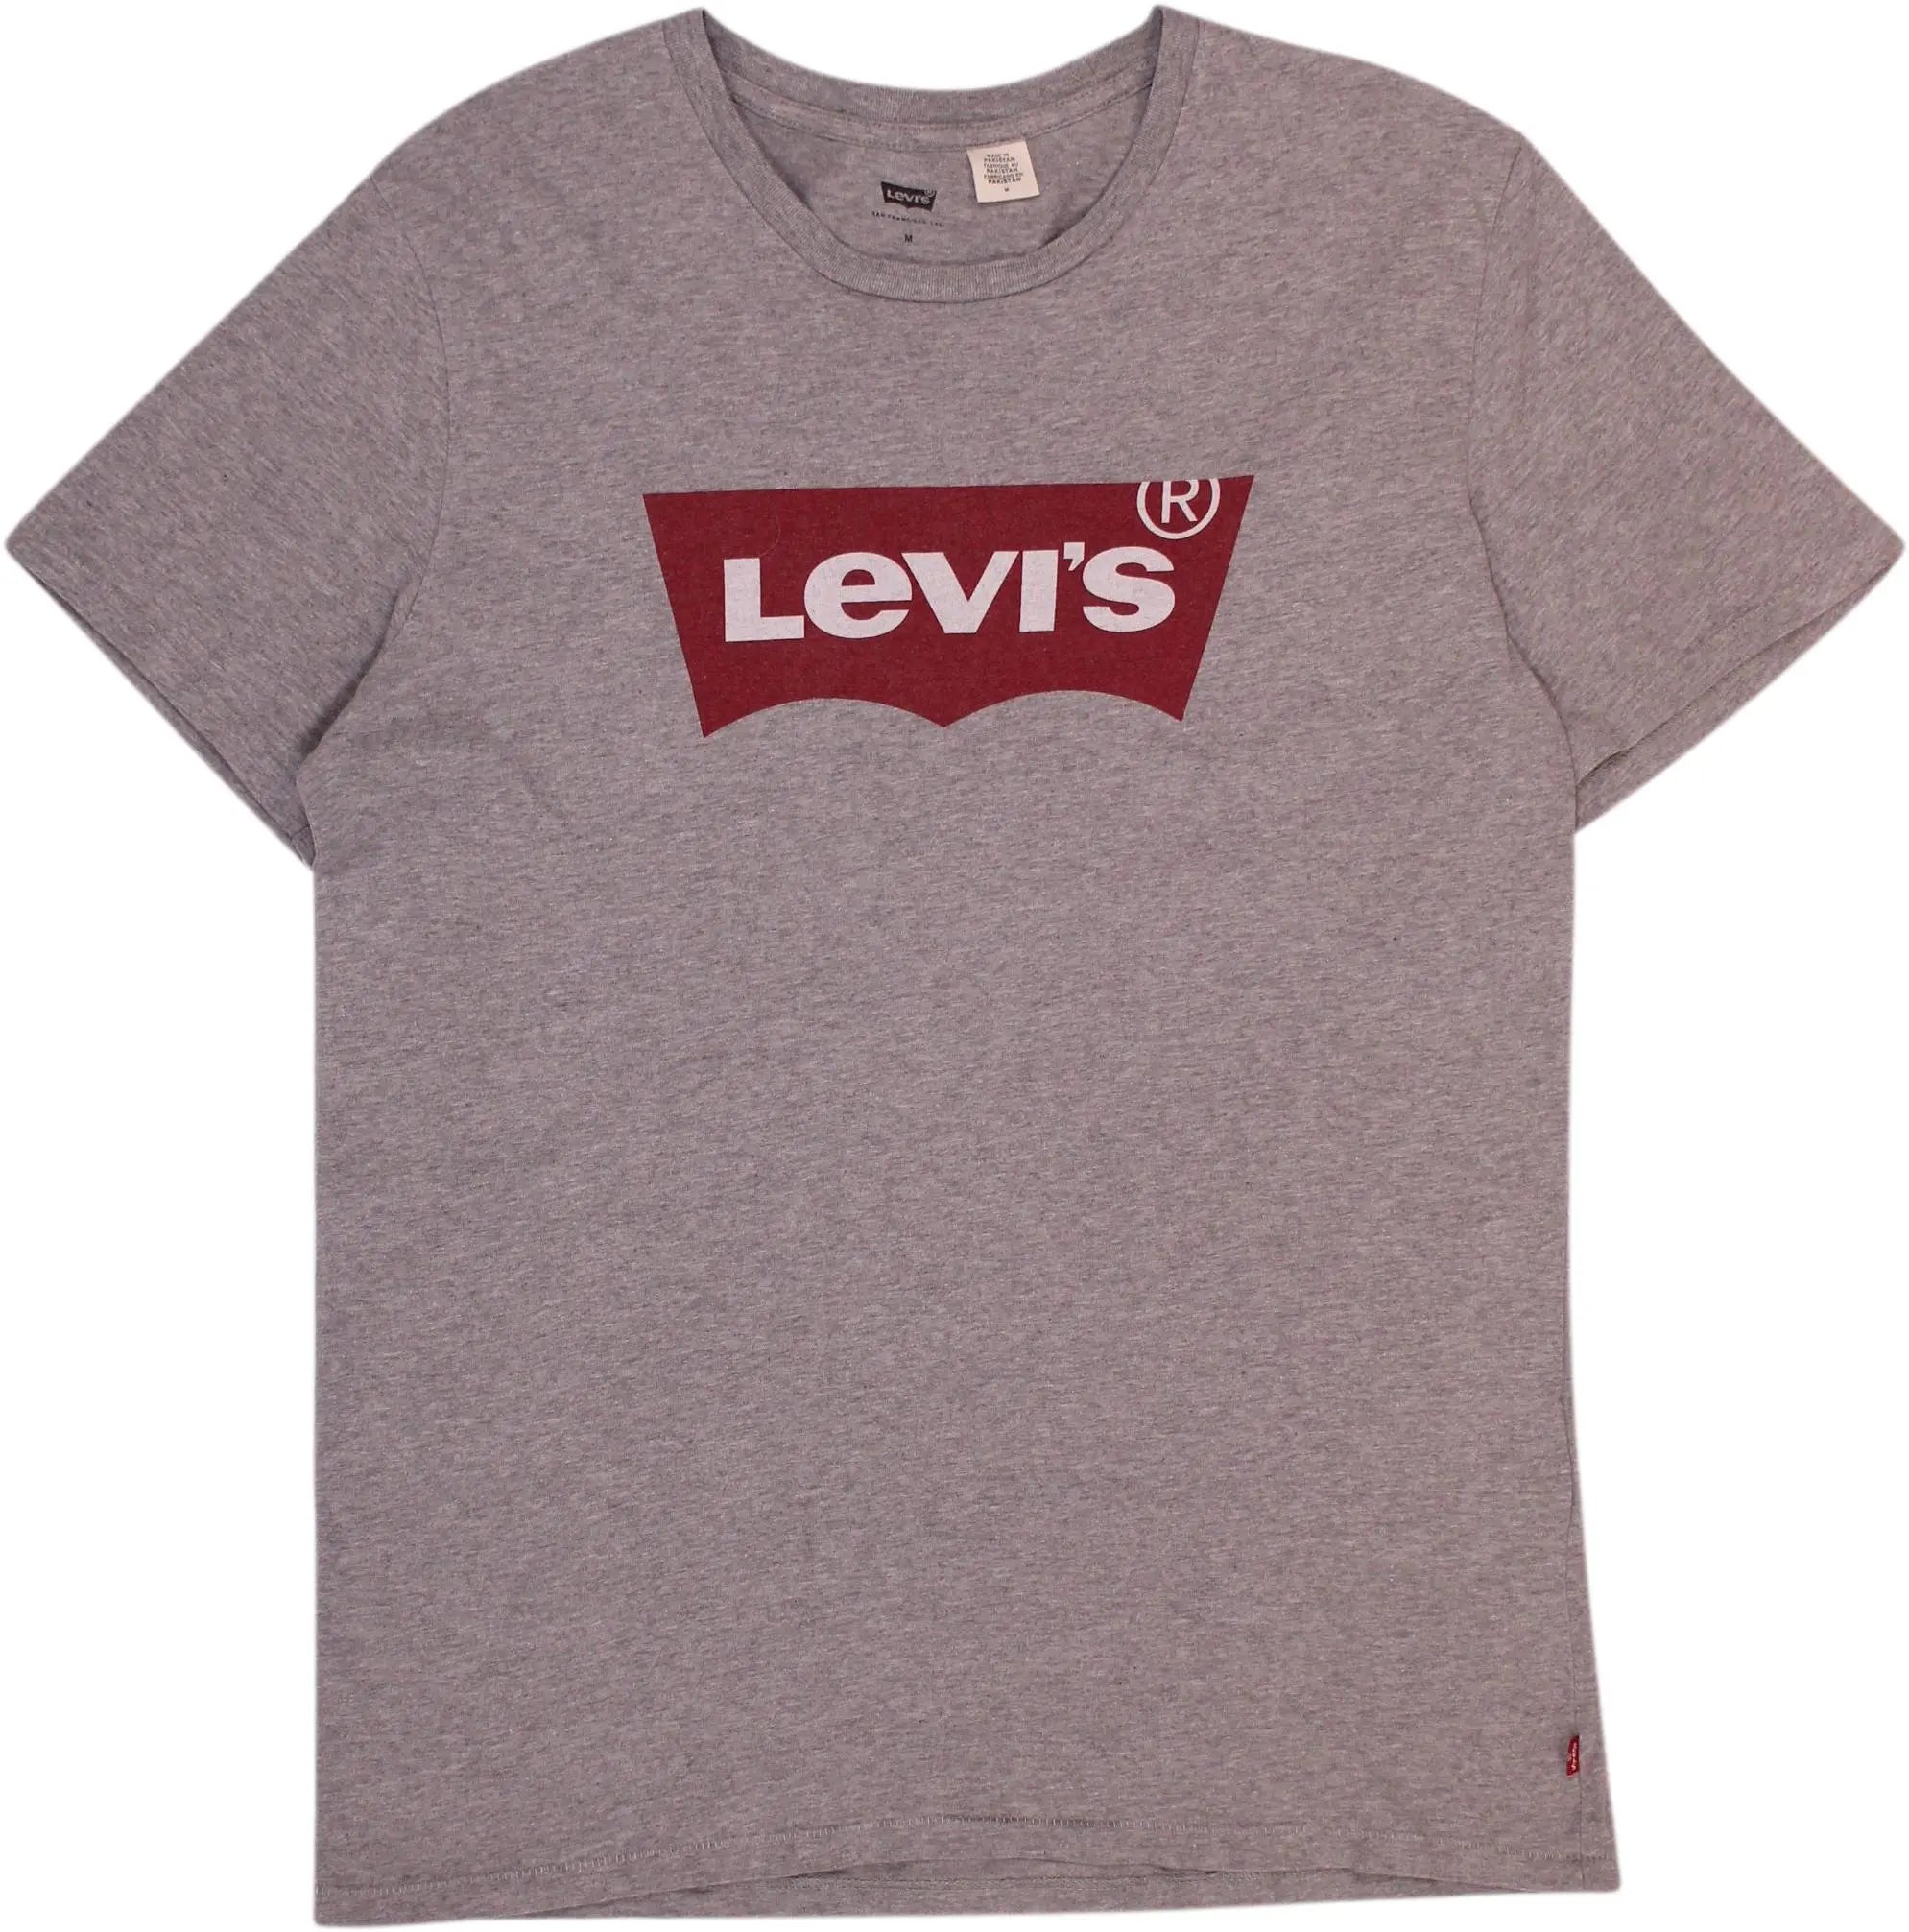 Levi's - Grey T-shirt by Levi's- ThriftTale.com - Vintage and second handclothing